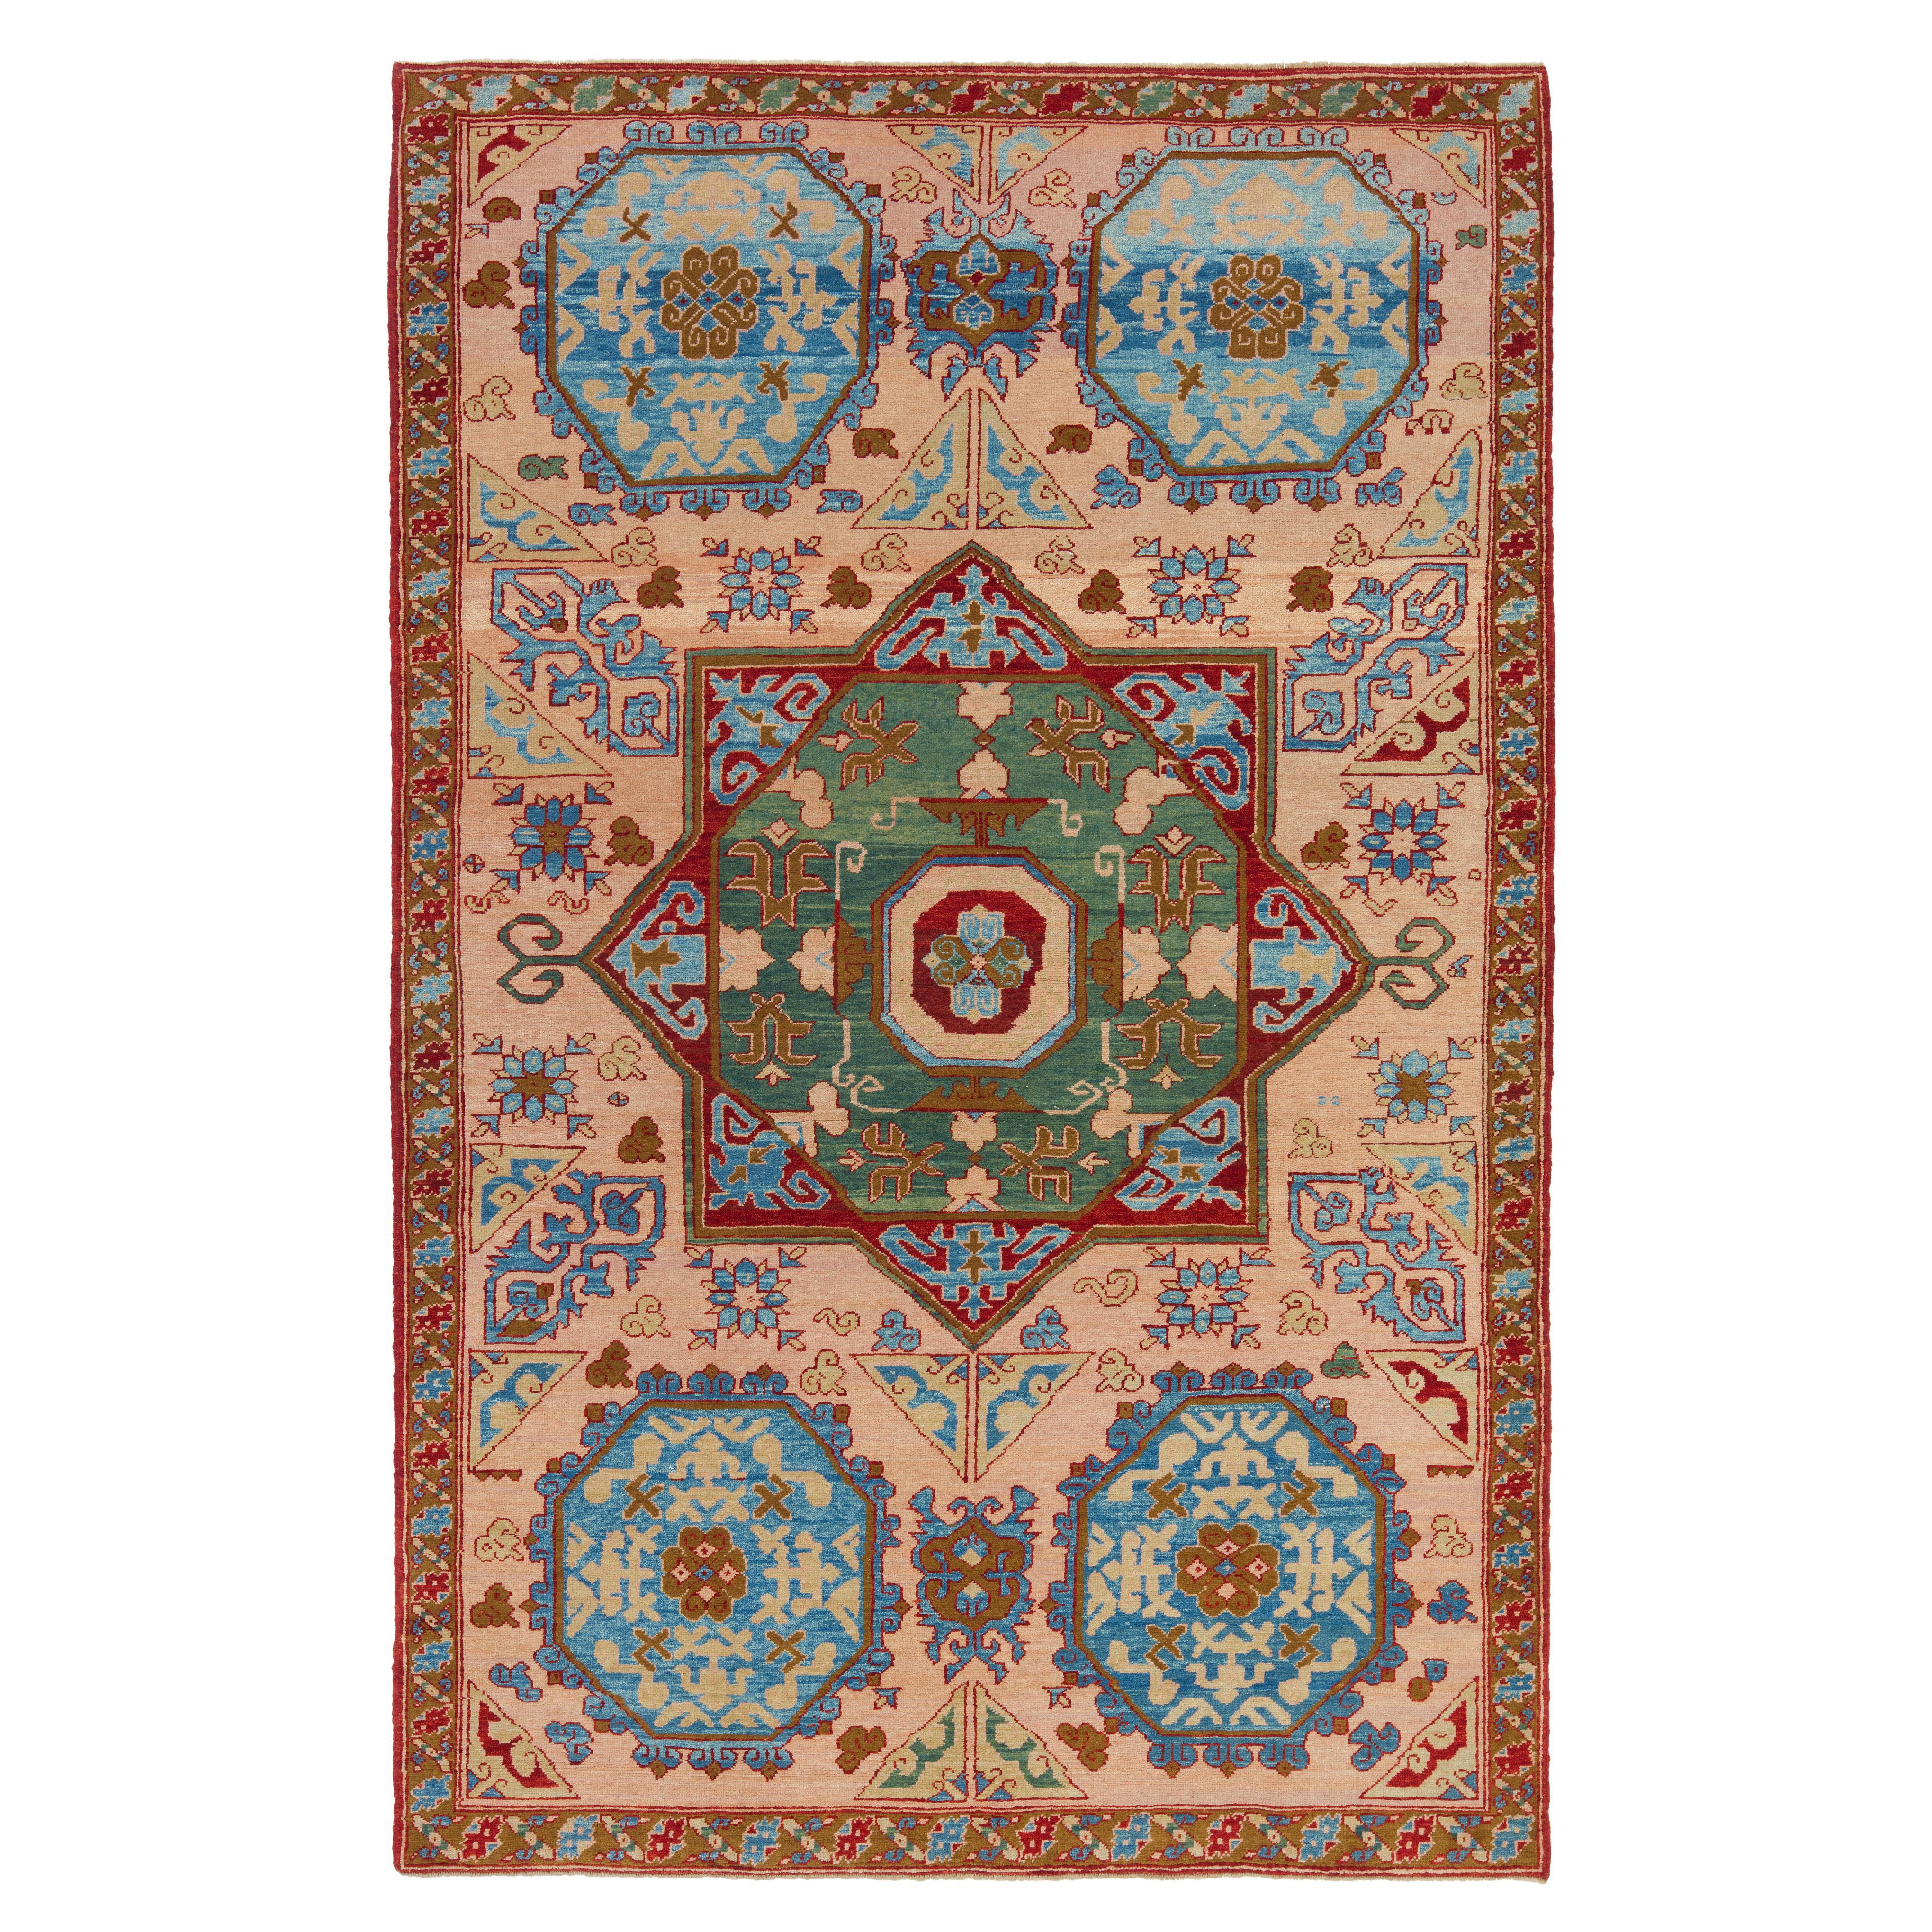 Ararat Rugs Star and Octagon Medallion Carpet Anatolian Revival Rug Natural Dyed For Sale